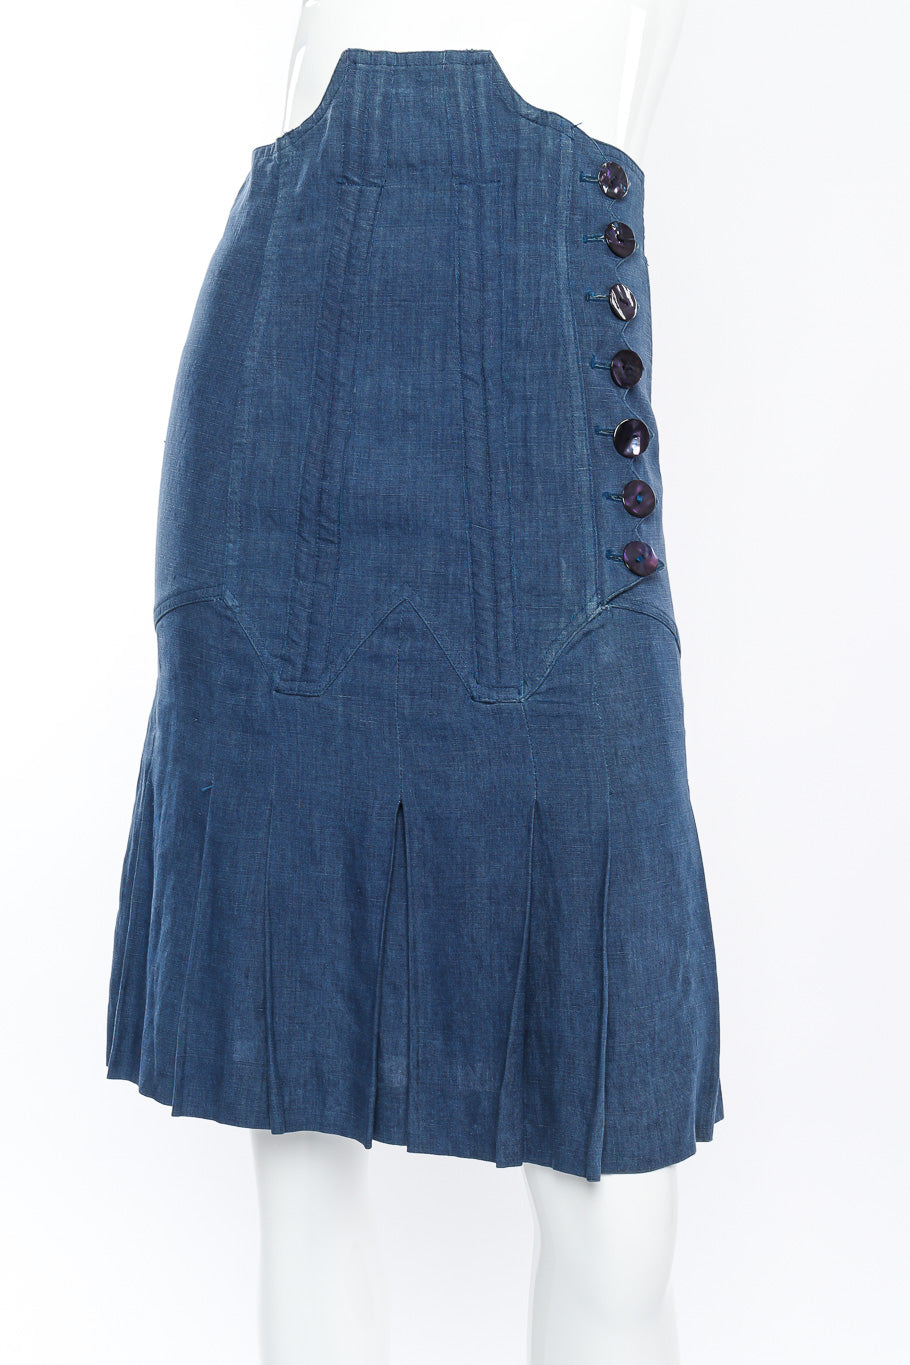 Pleated corset skirt by Jean Paul Gaultier on mannequin front close @recessla